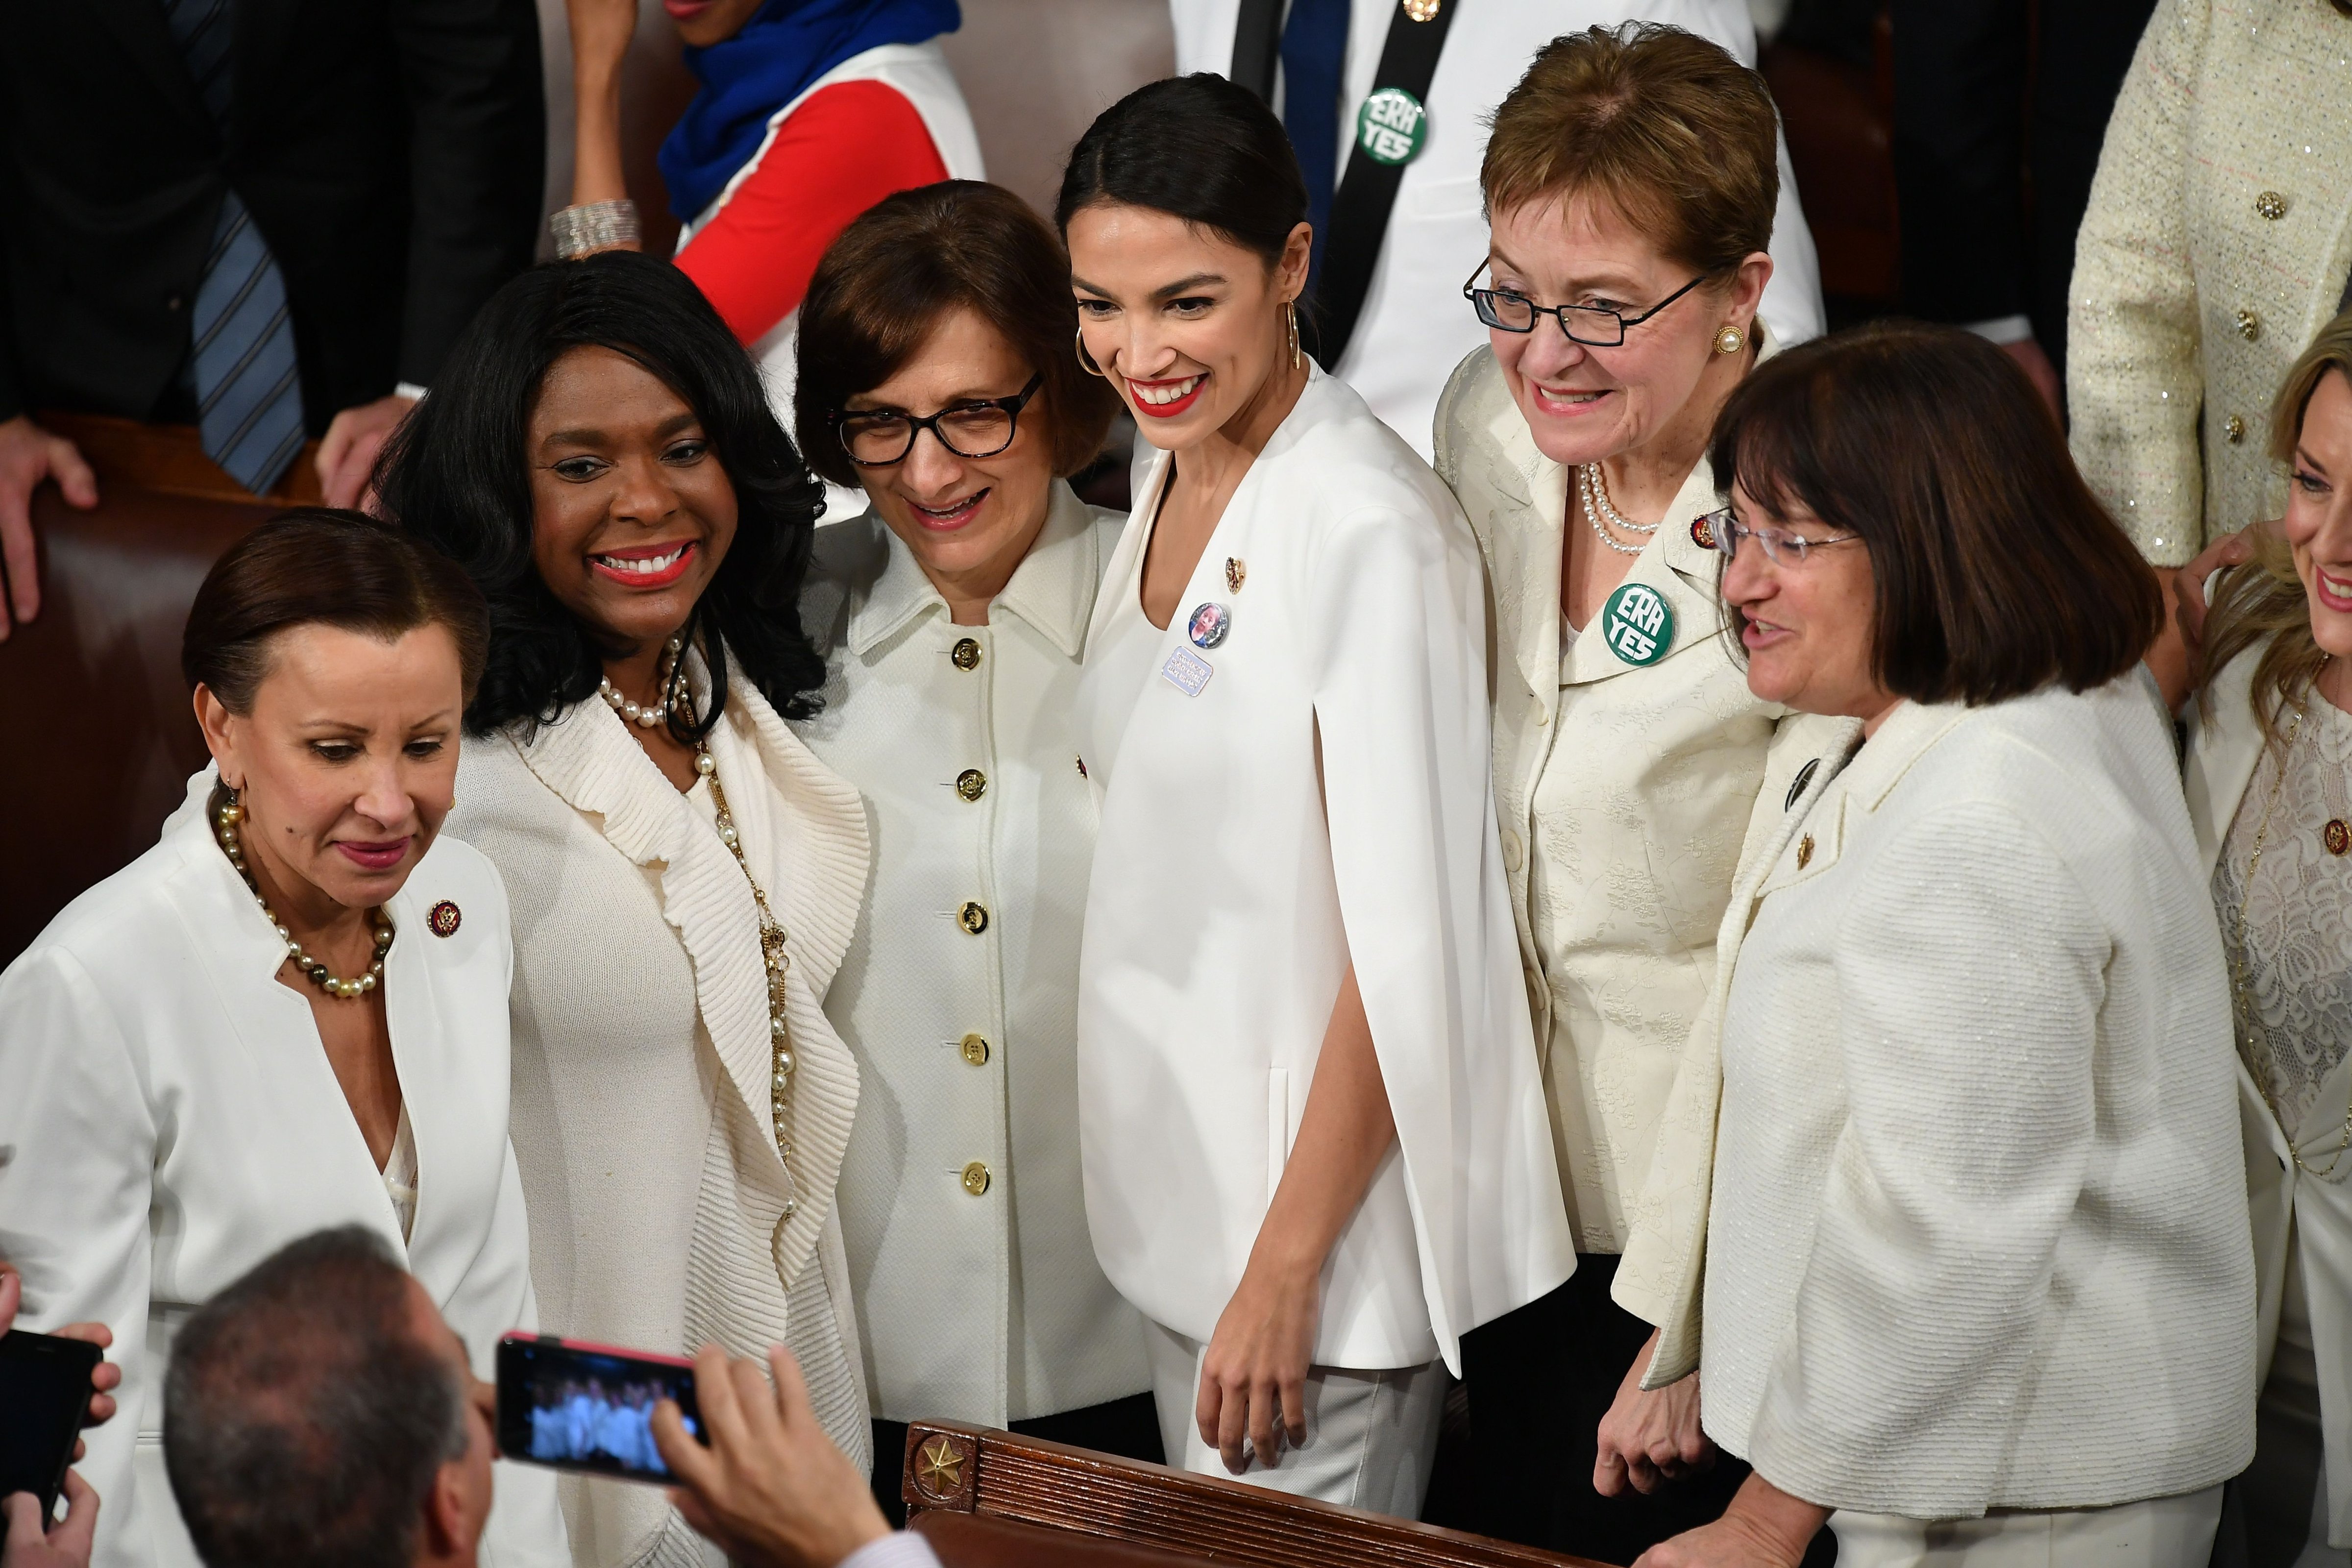 Alexandria Octavio-Cortez (C) poses for a picture with other women ahead of U.S. President Donald Trump's State of the Union address at the U.S. Capitol in Washington, DC, on February 5, 2019. Women from both political parties wore white outfits at the behest of the Democratic Women's Working Group to honor the legacy of women's suffrage in the United States. (MANDEL NGAN—AFP/Getty Images U.S. Rep)